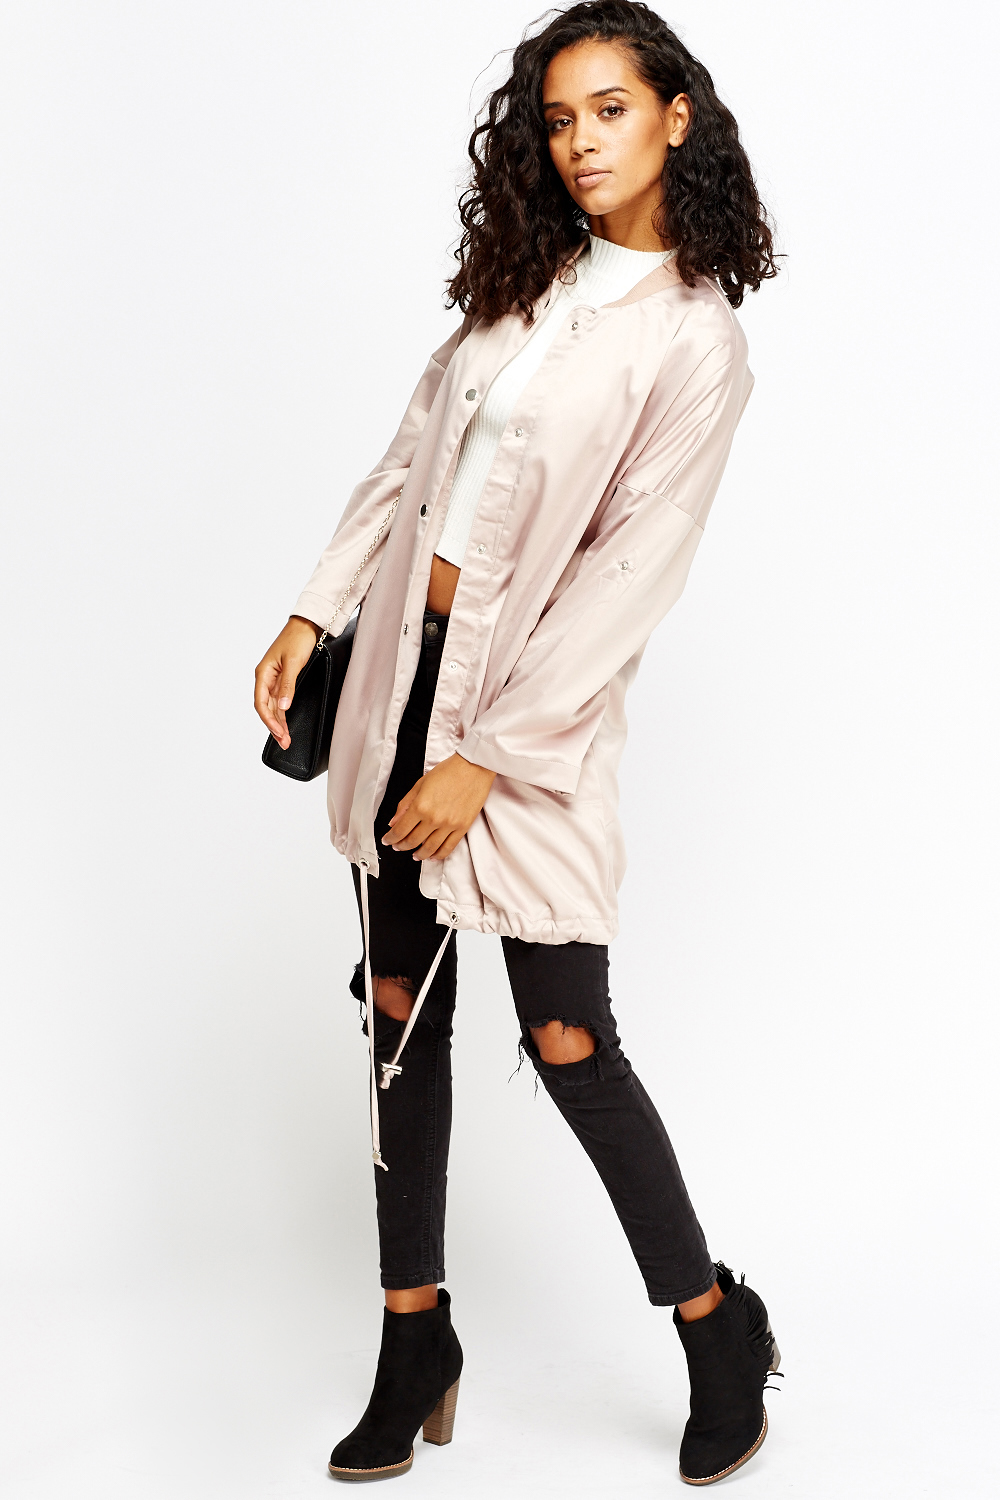 Nude Long Line Jacket - Just $7